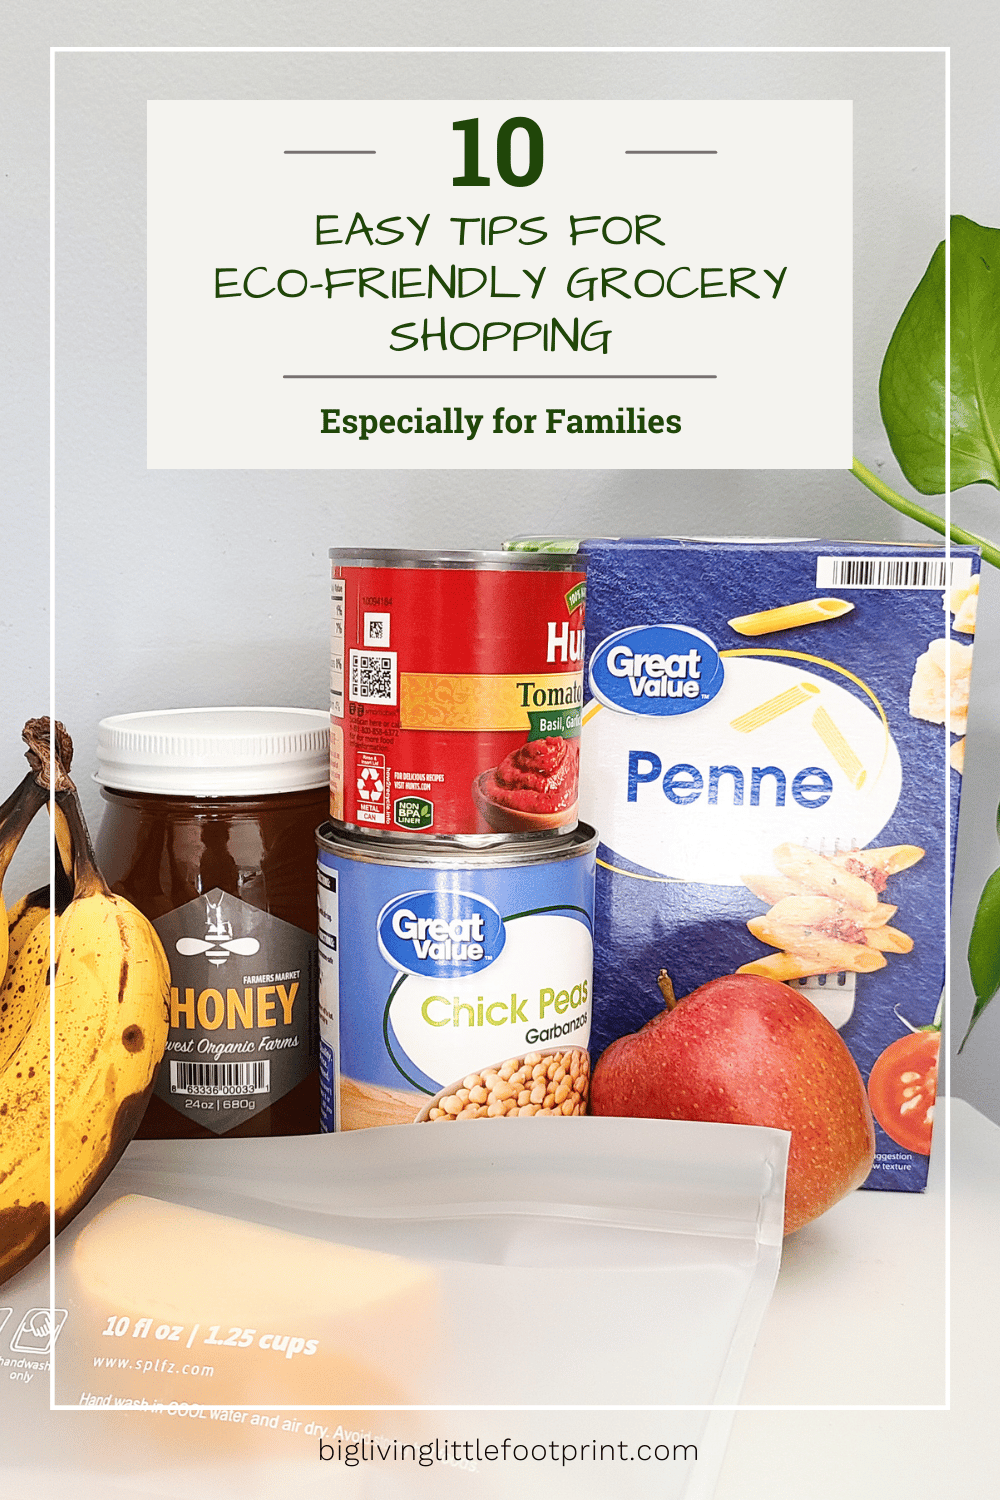 10 Easy Tips for Eco-friendly Grocery Shopping for Families